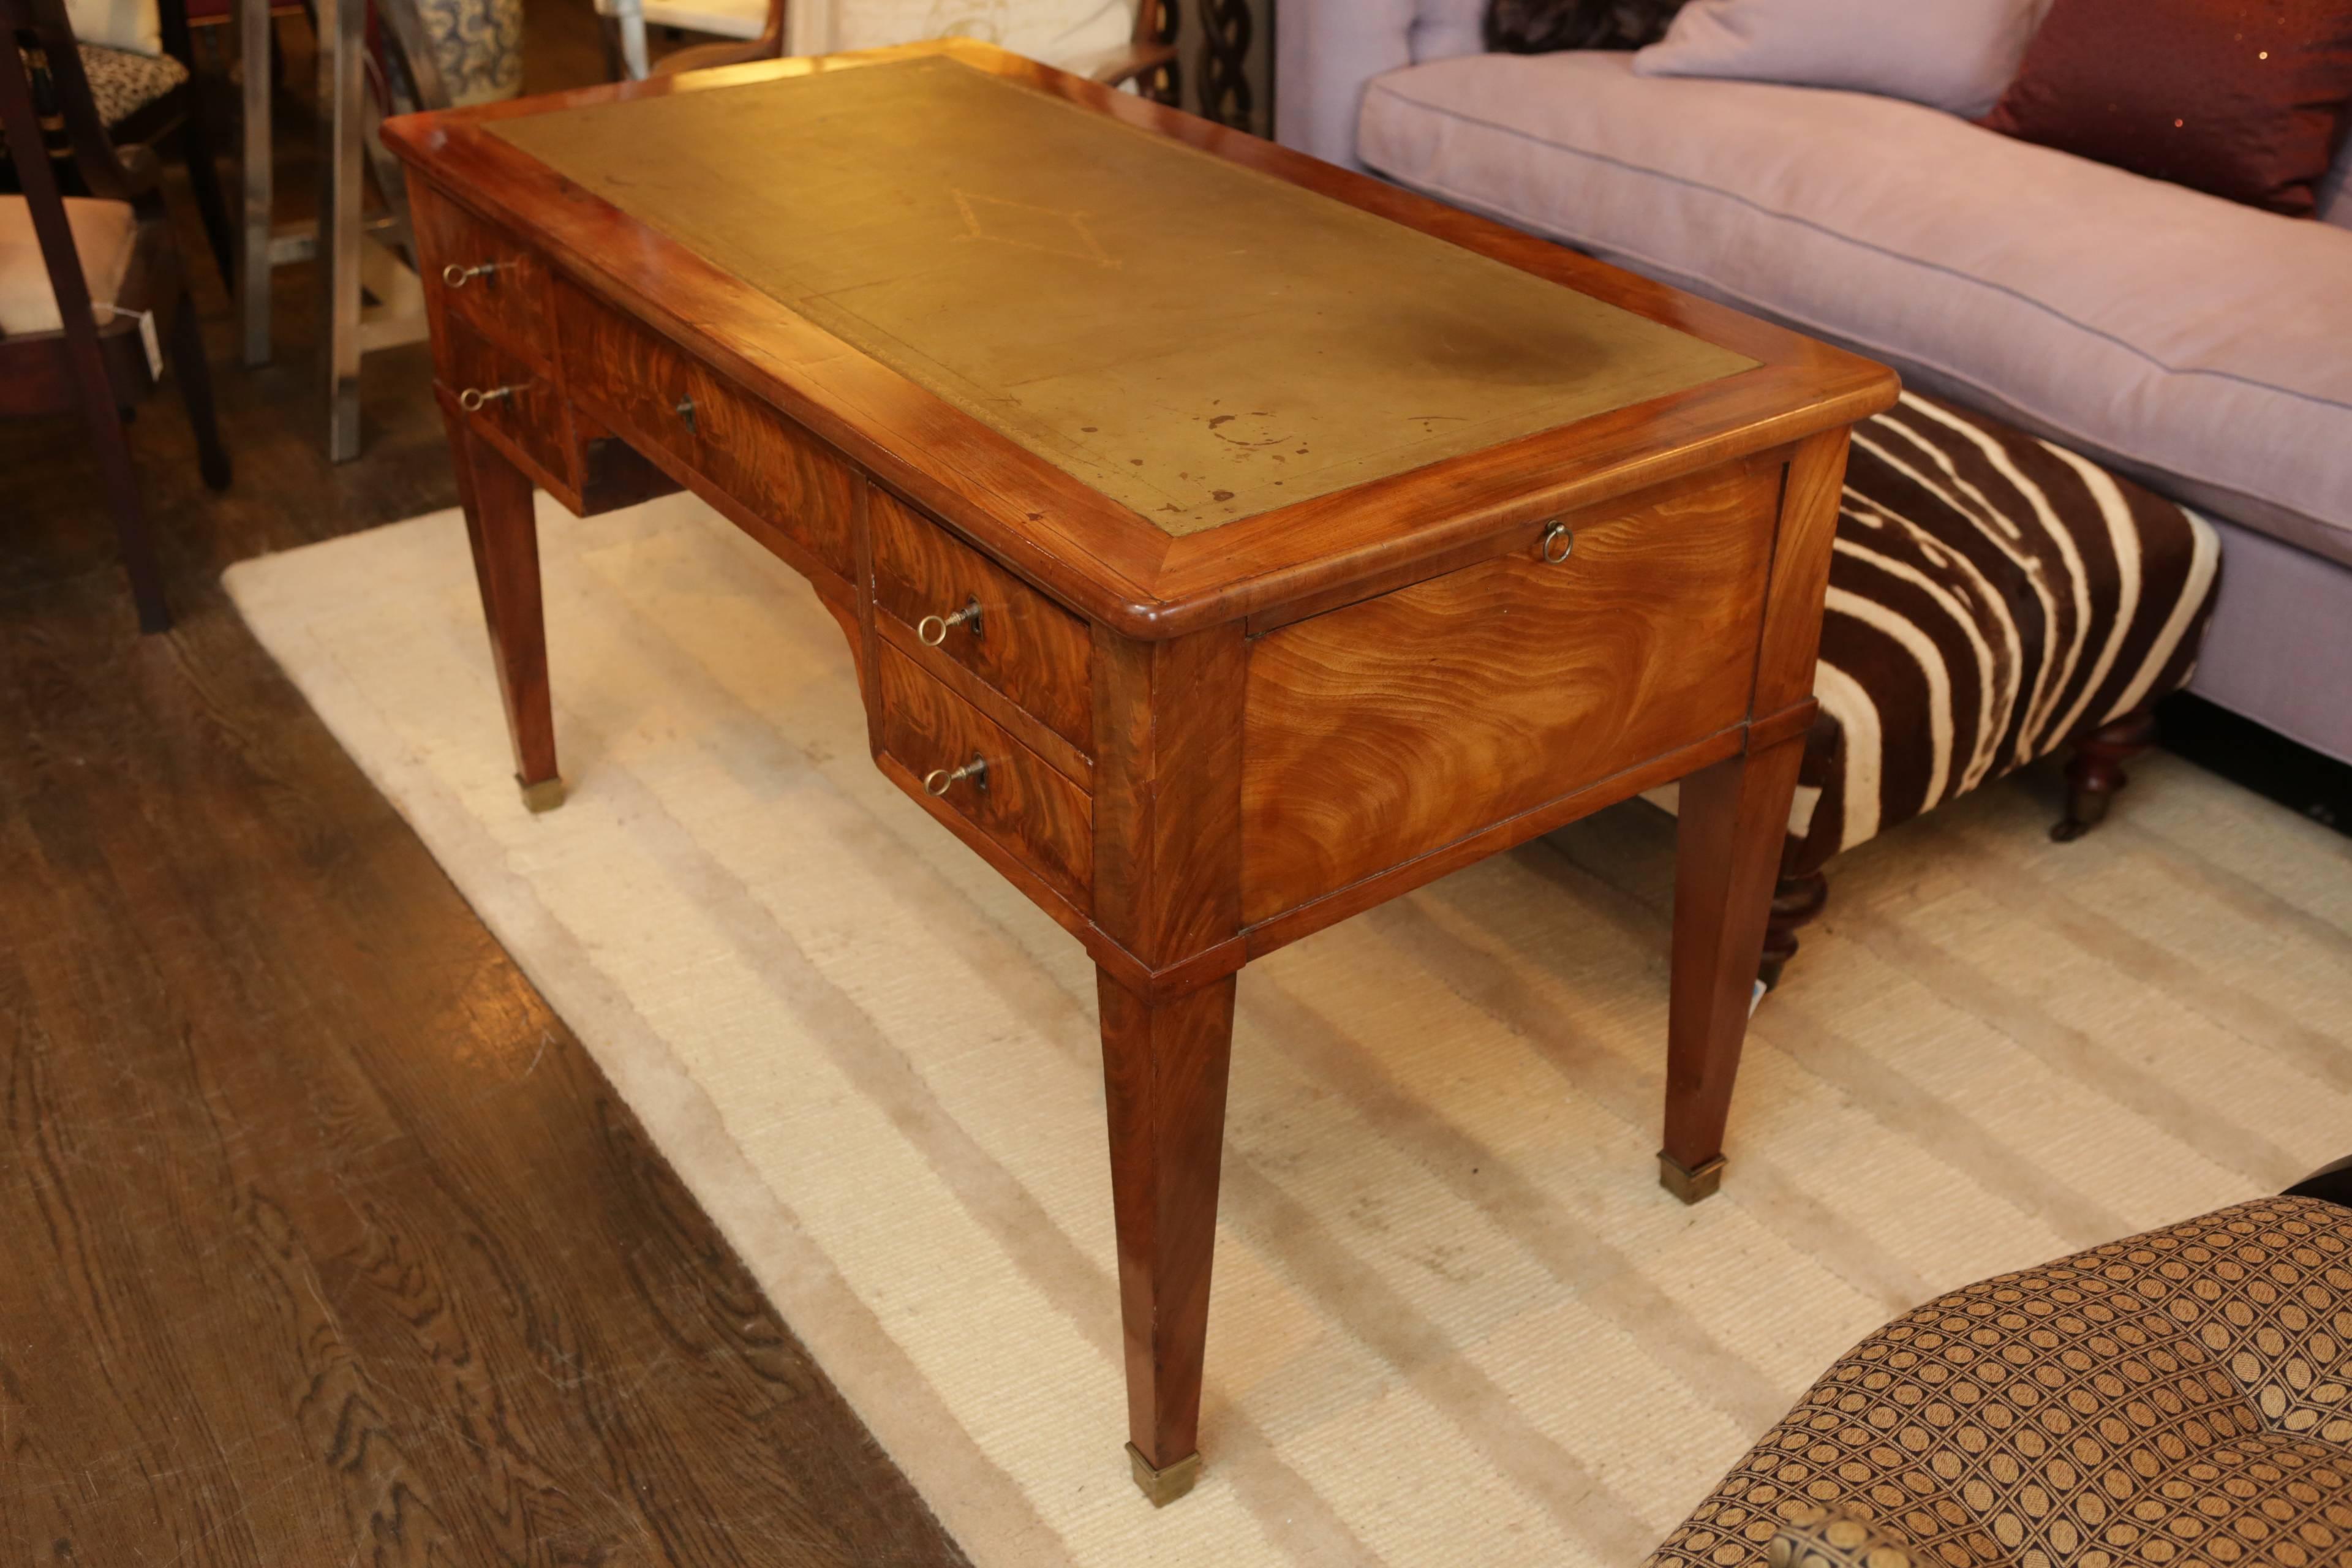 19th Century Charles X French Tiger Maple Desk with Tooled Leather Top